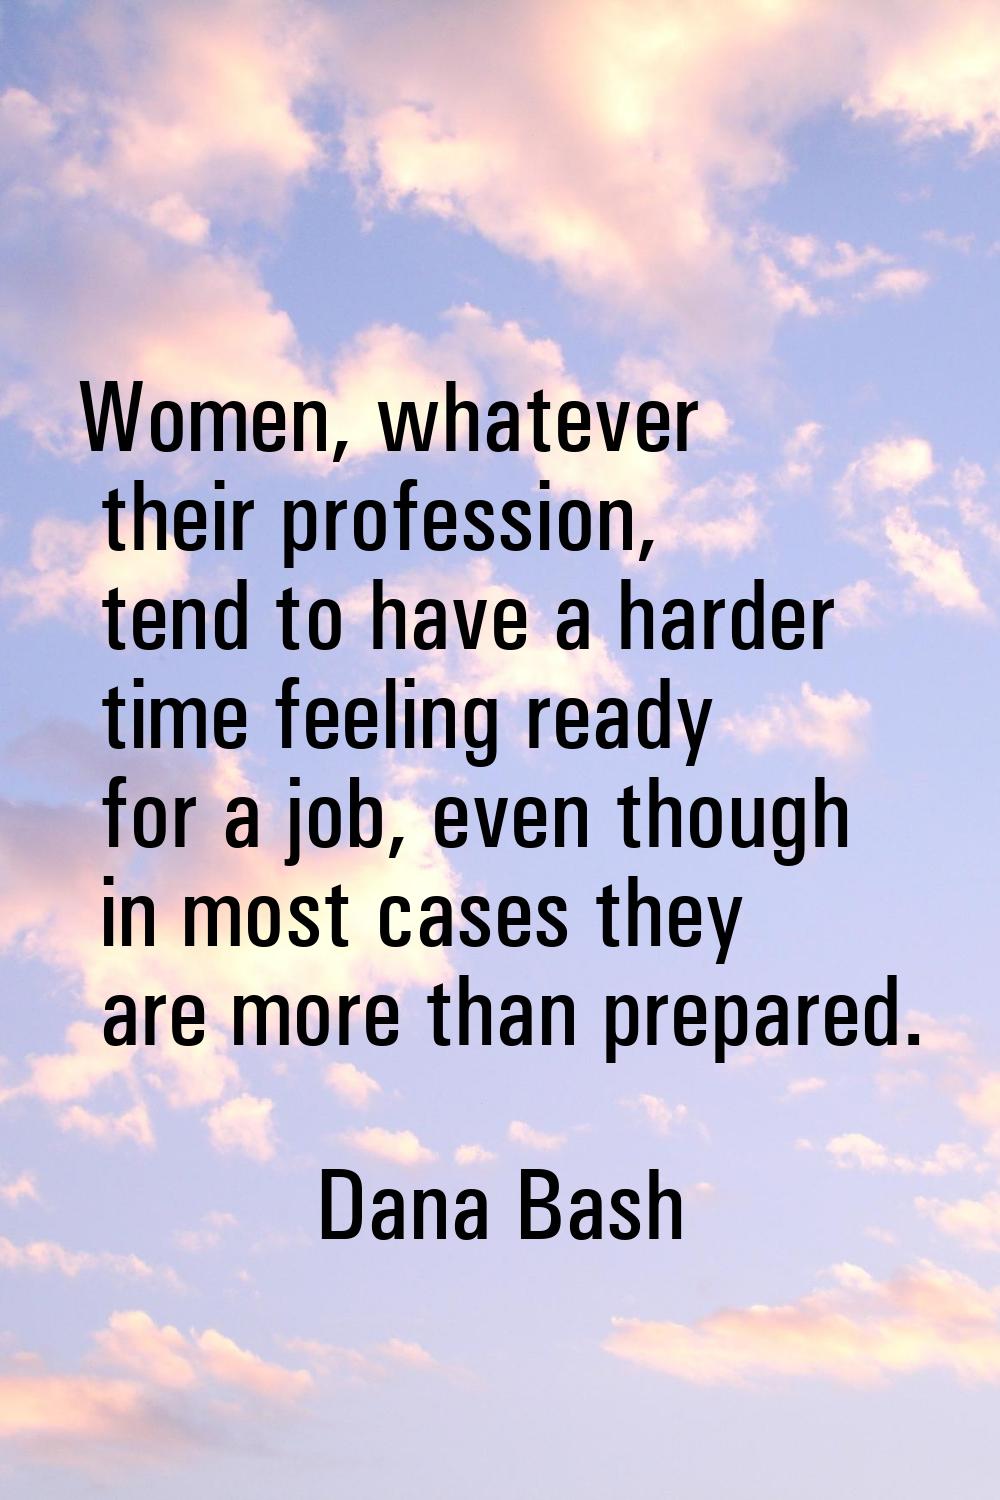 Women, whatever their profession, tend to have a harder time feeling ready for a job, even though i